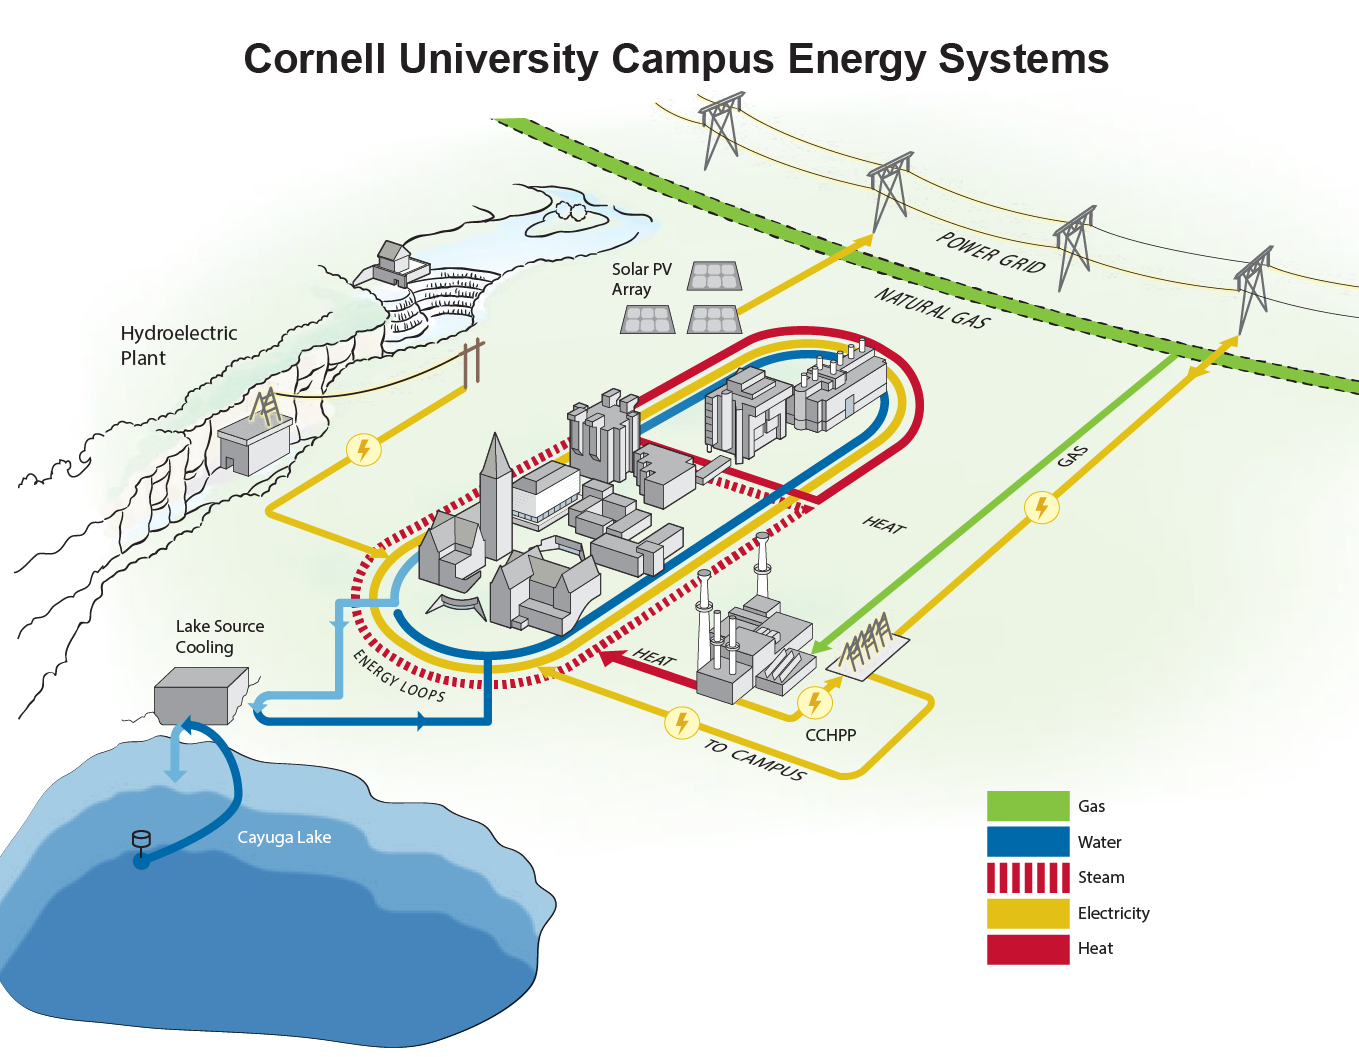 Diagram showing overview of campus energy systems at cornell in place and proposed, including solar, hydroplant, lake source cooling and combined heat and power today, with future solar and earth source heat proposed